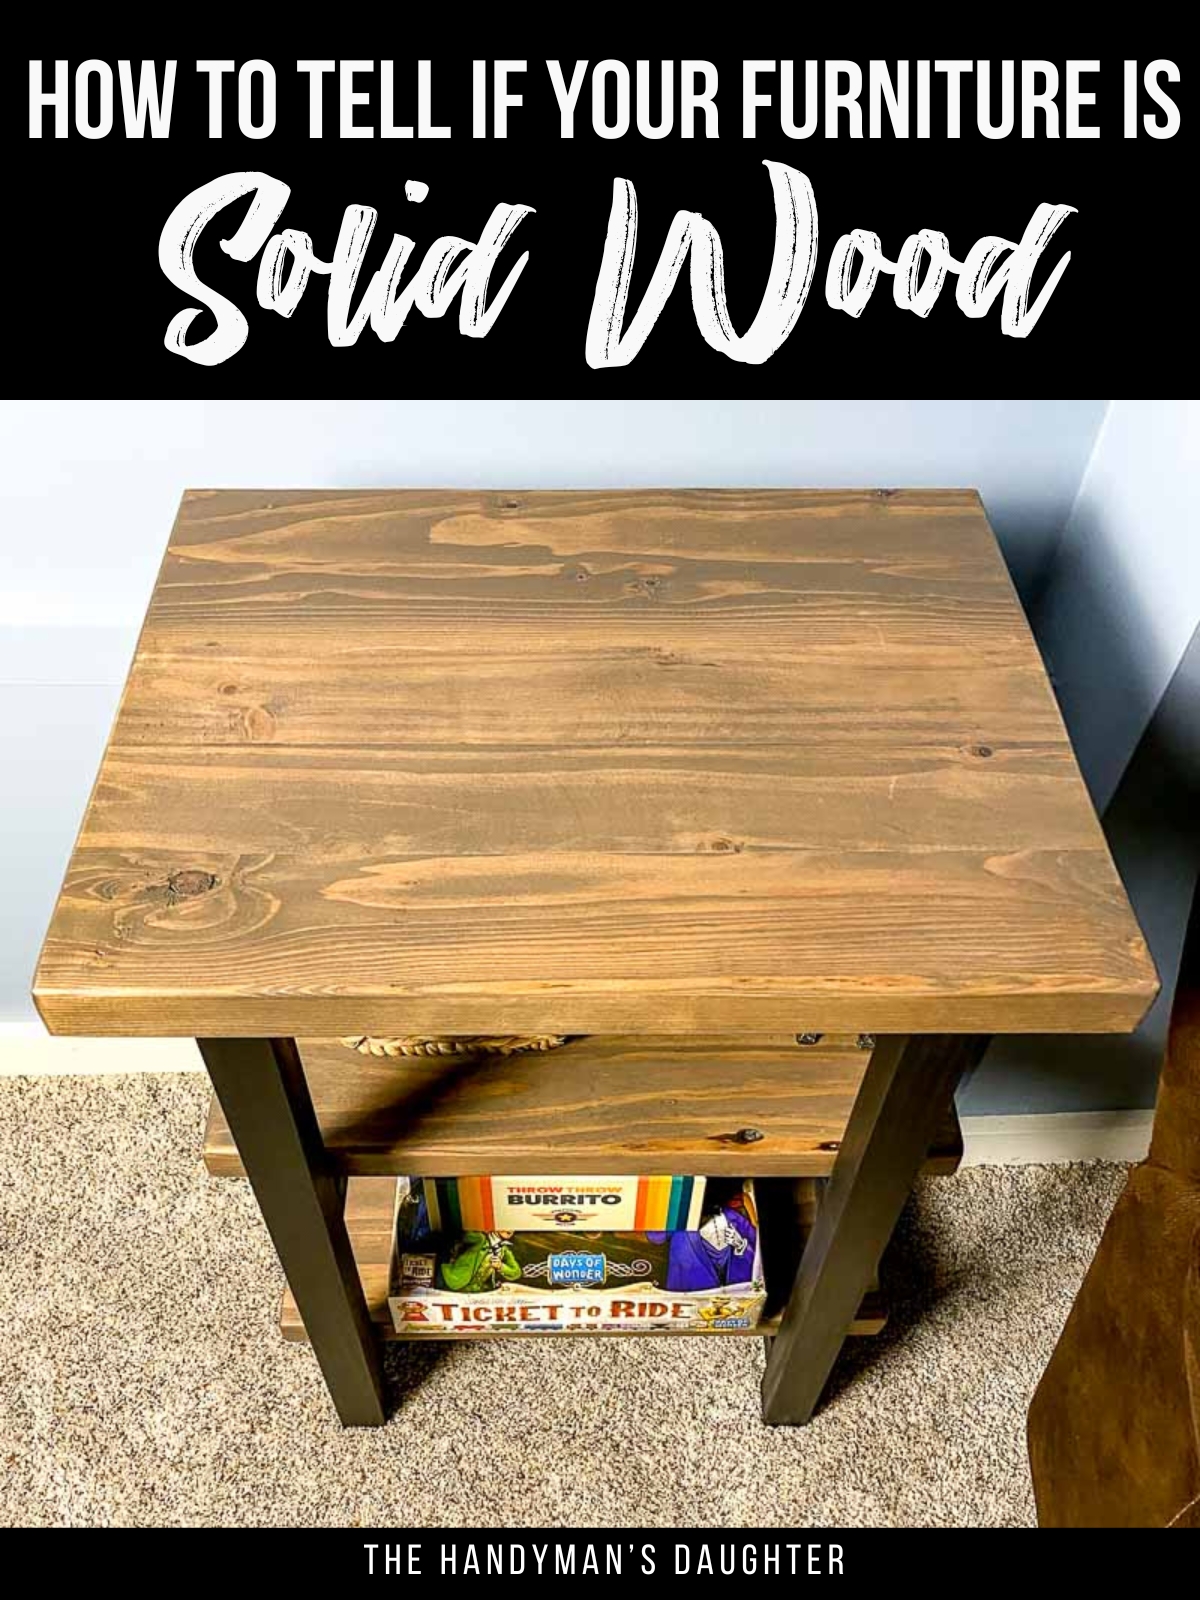 solid wood furniture with text overlay "how to tell if your furniture is solid wood"